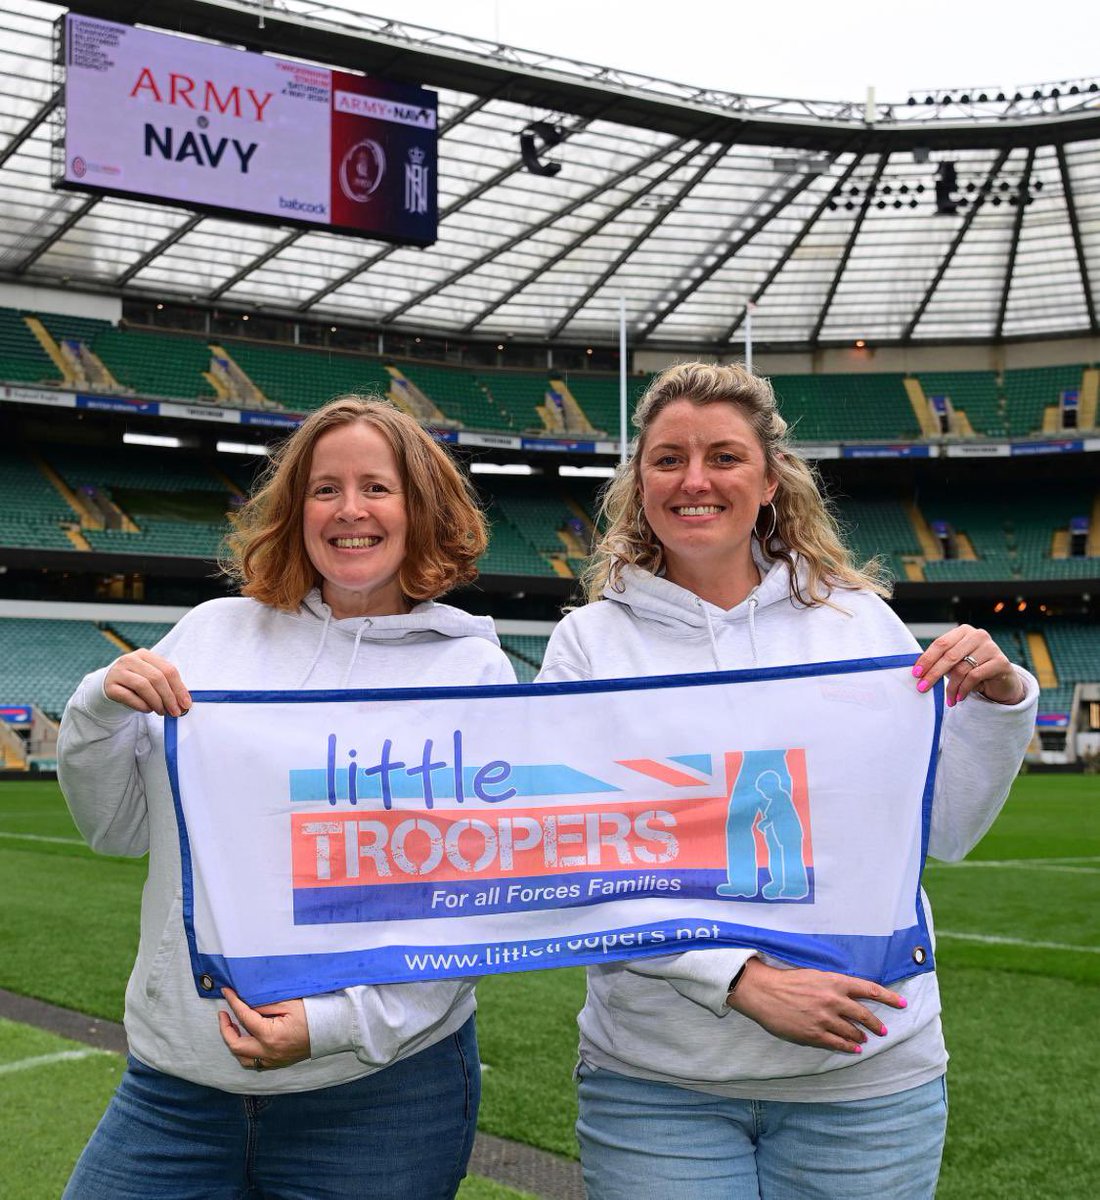 We’ve arrived at Twickenham for this year’s Army vs Navy game because Little Troopers has been chosen as Charity of the Day 🙌 Find us tomorrow in the West Village 🙌 @ppauk #ArmyvsNavy